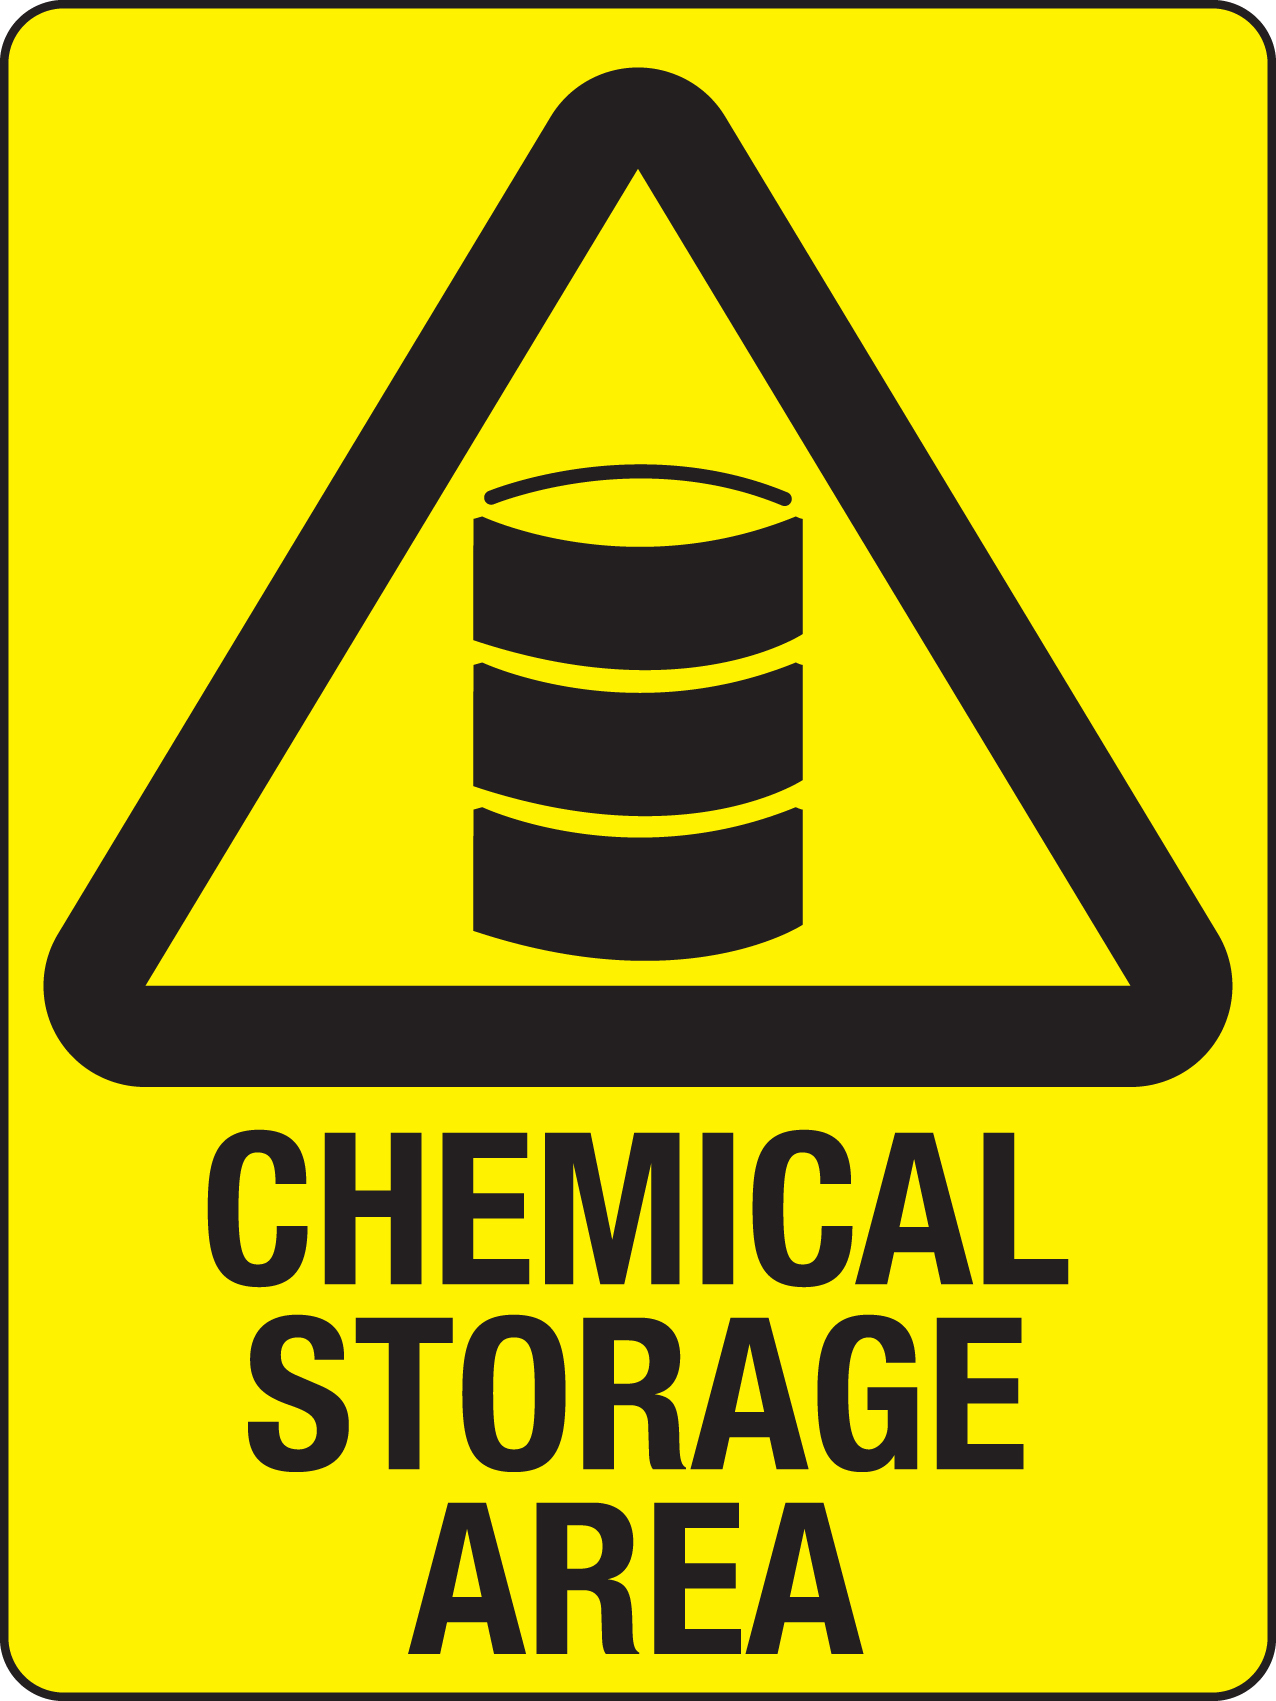 Toxic Warning Signs Chemical Hazards Workplace Safety - vrogue.co